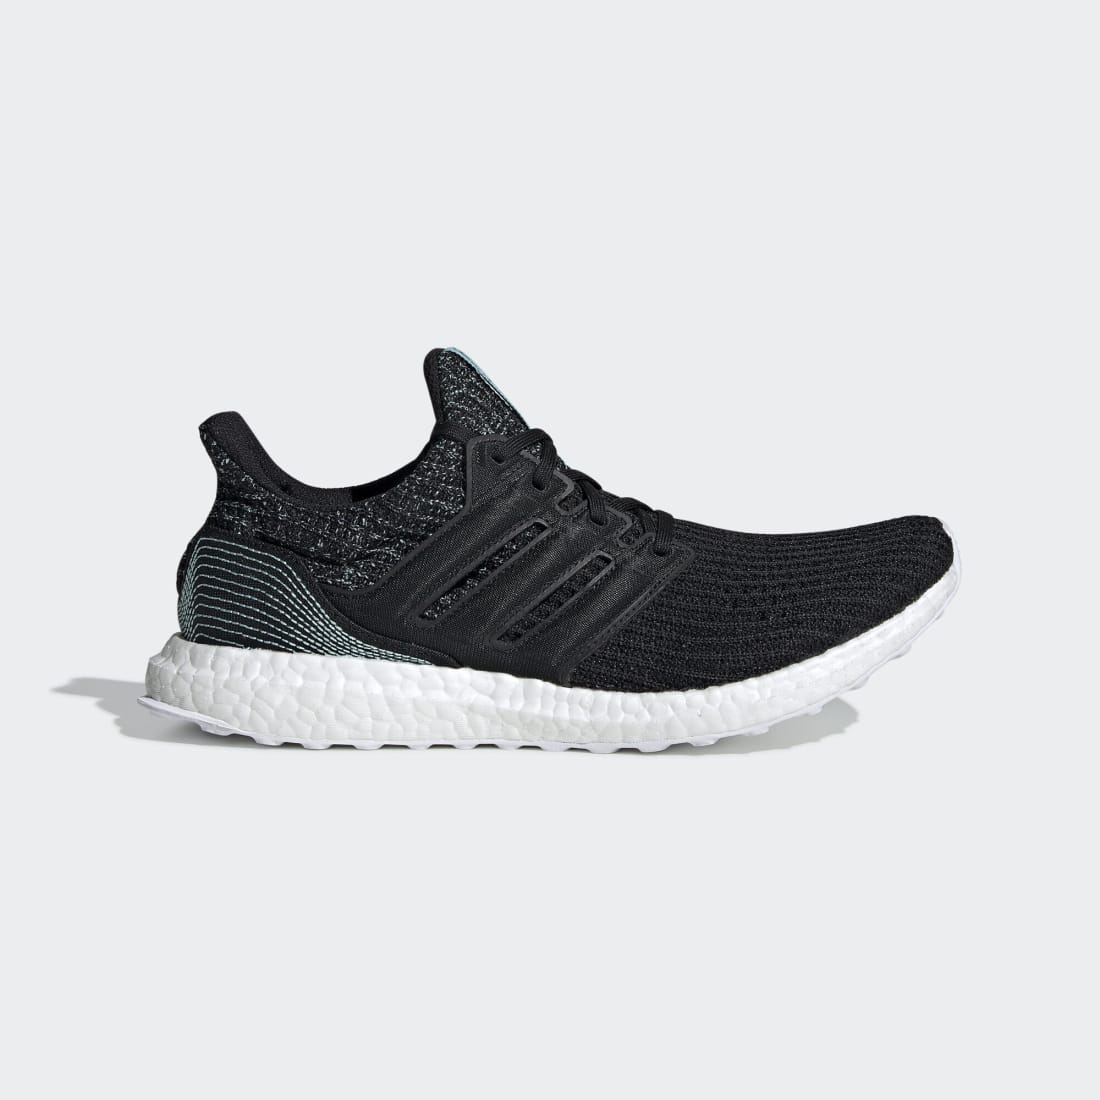 adidas Ultra Boost 4 Parley Core Black Cloud White | Adidas | Dates, Sneaker Calendar, Prices Collaborations